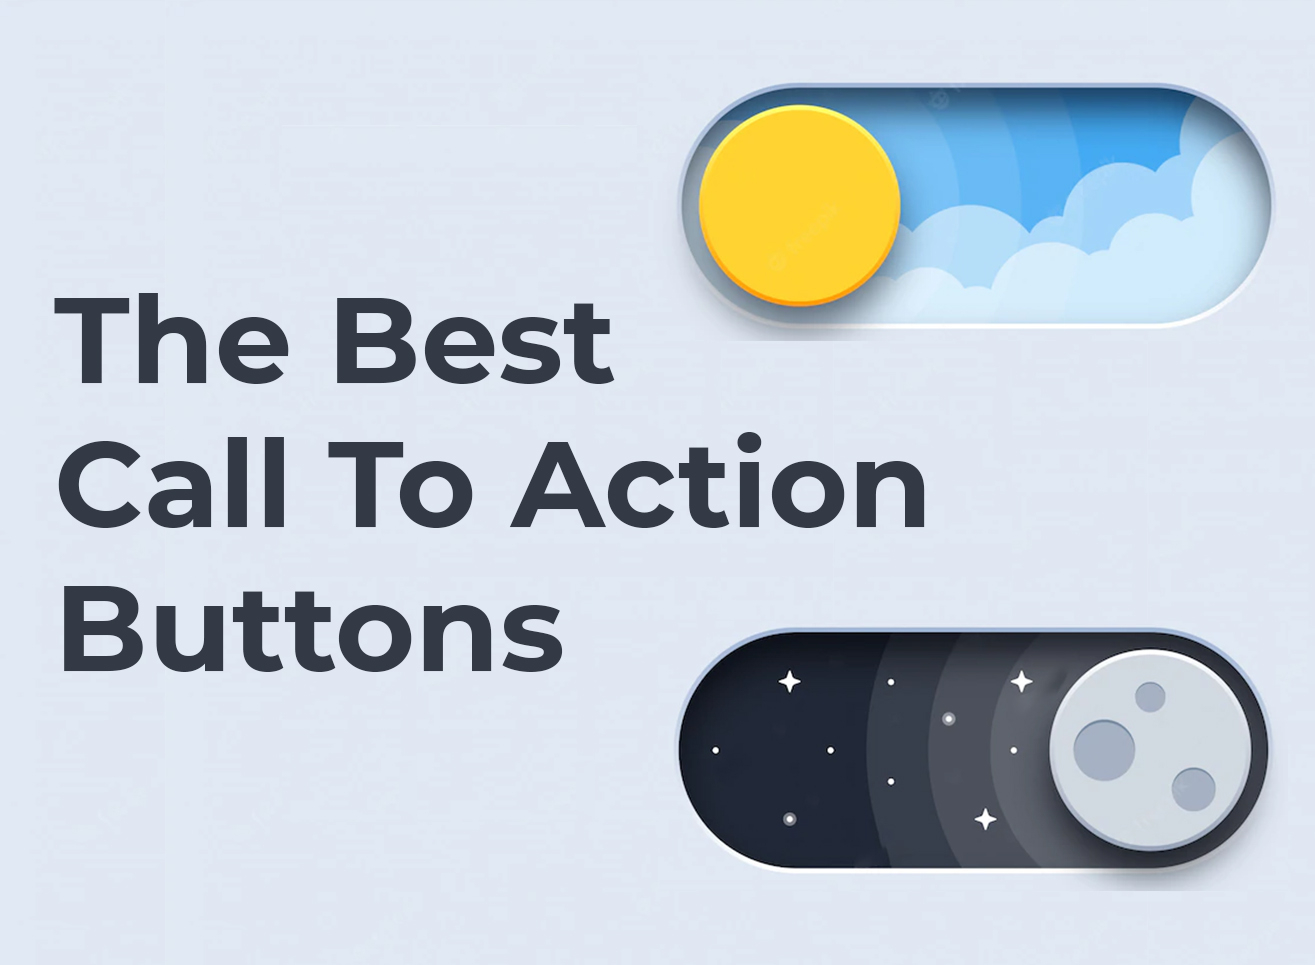 I Spent 30 Days Analyzing The Best Call To Action Buttons I Could Find On The Internet